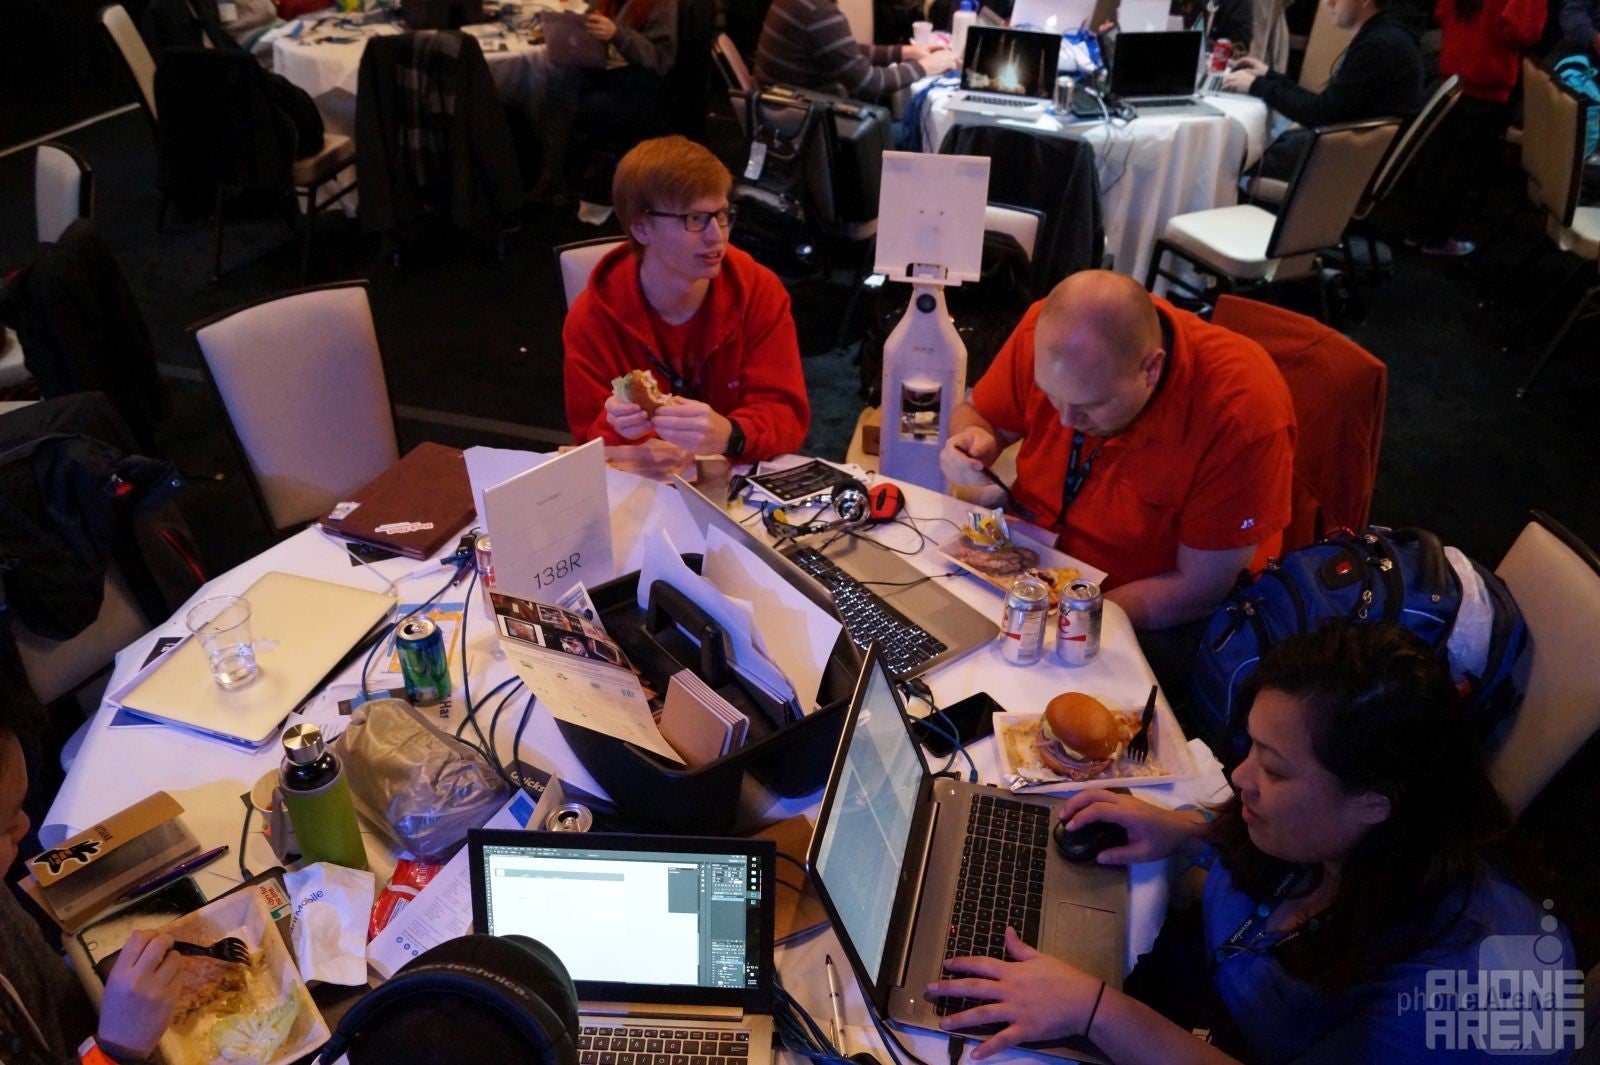 Developers from the University of Washington at Tacoma take turns refueling and coding while the marathon hackathon gets underway at the AT&amp;amp;T Developer Summit - The AT&amp;T Developer Summit Hackathon is well underway